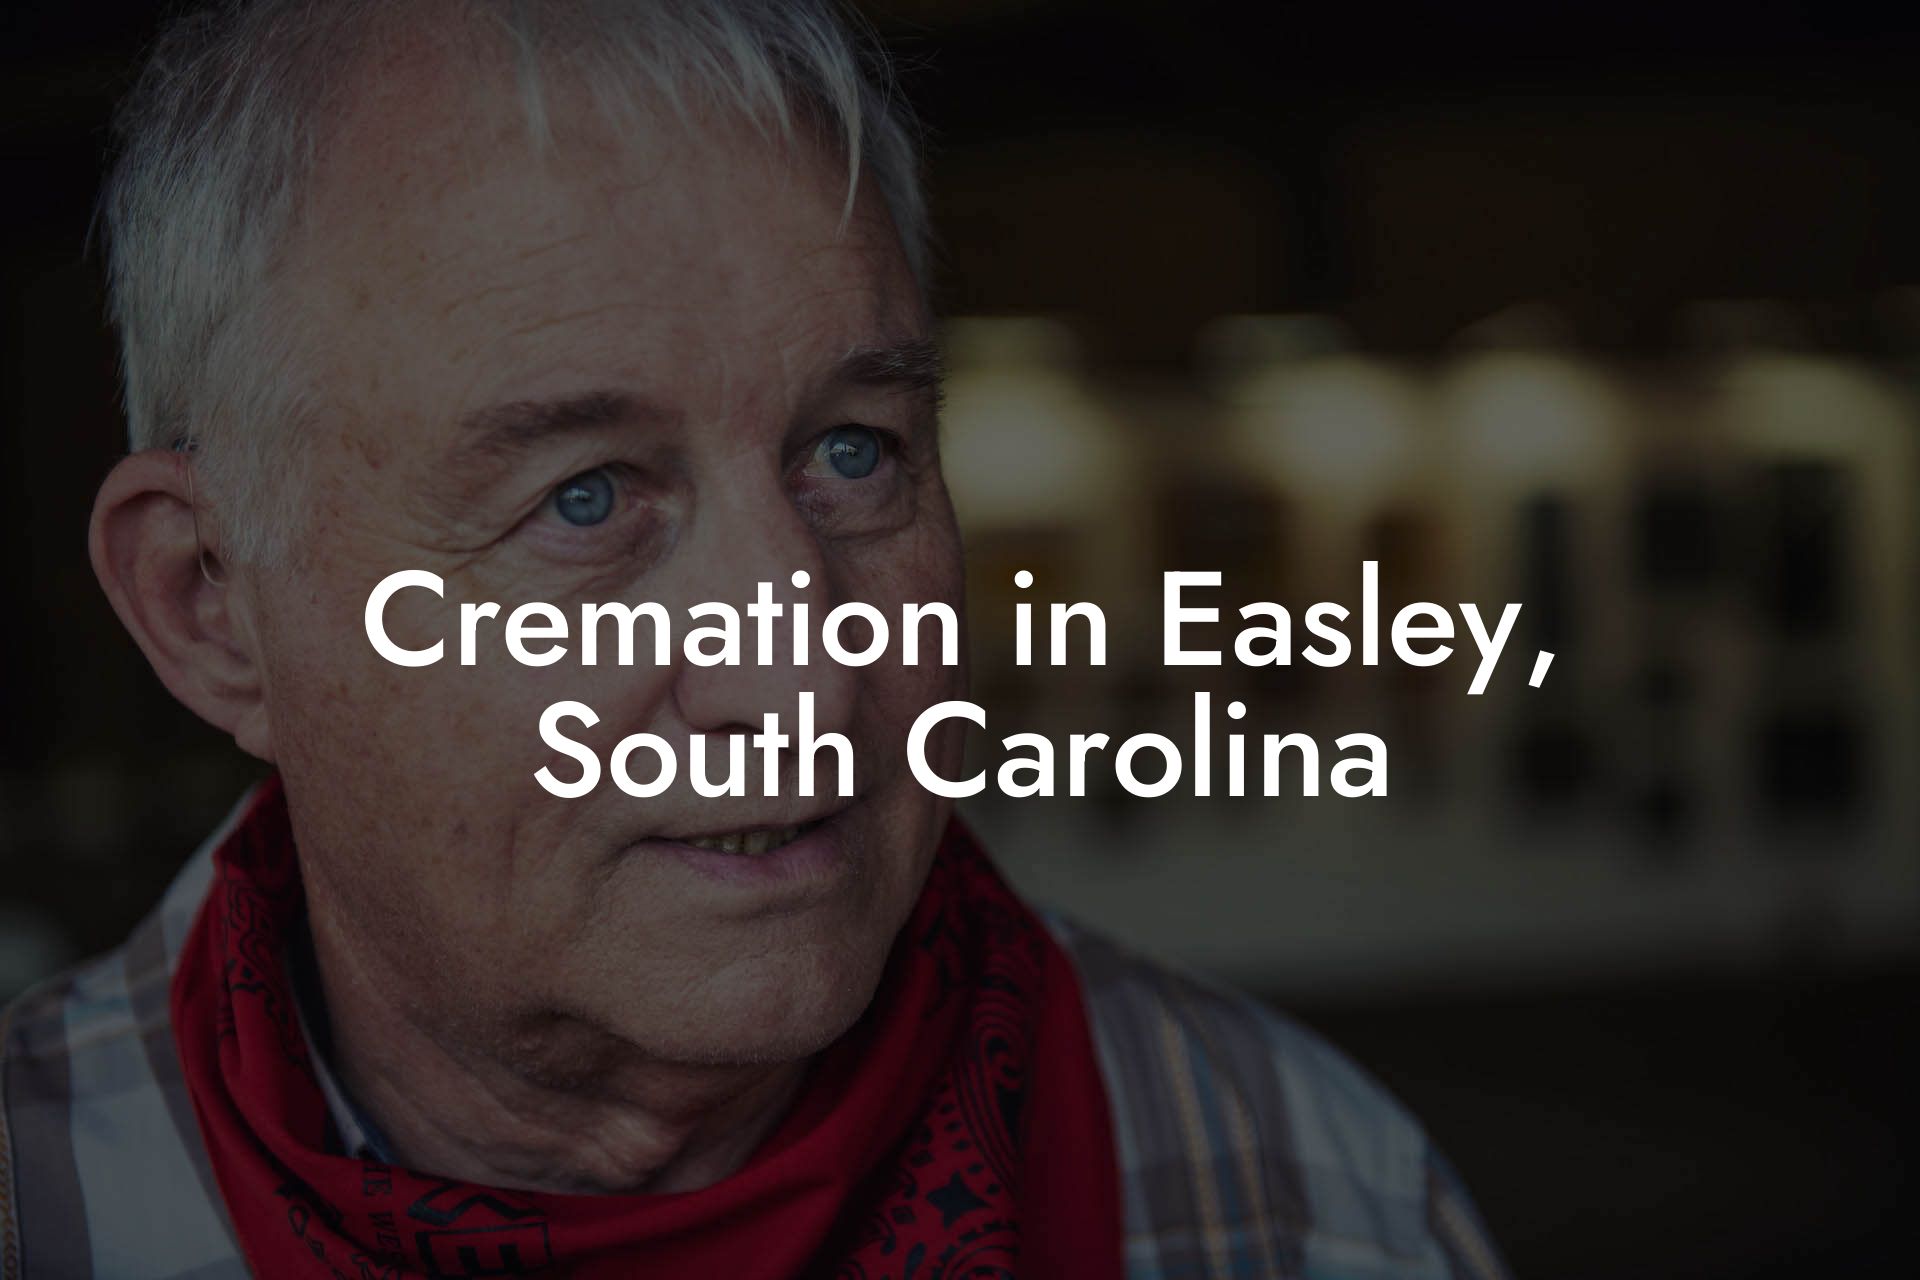 Cremation in Easley, South Carolina